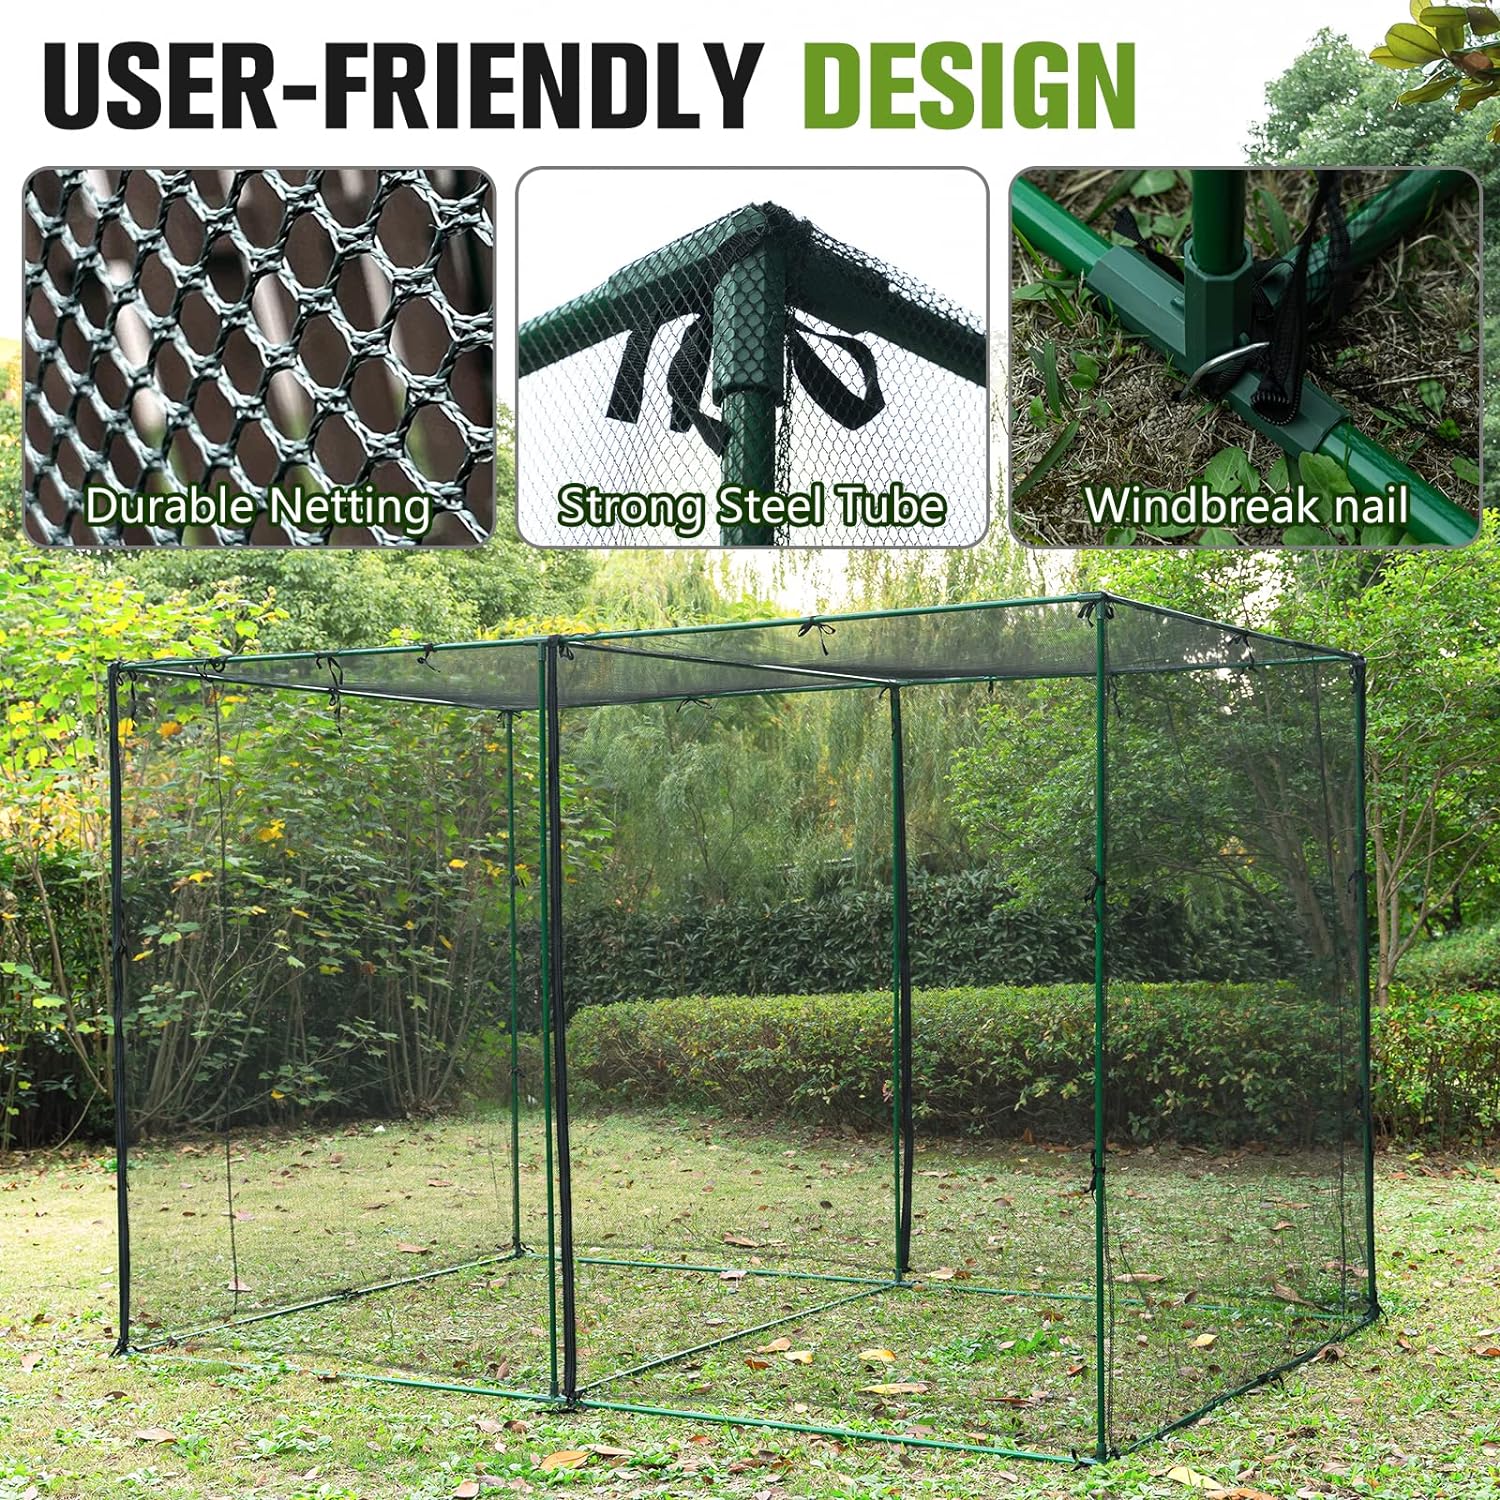 ZBPRESS Upgrade Crop Cage 10x6.5x6.5 Plant Protection Tent, Fruit Cage Netting Cover for Vegetable/Herbs/Fruit Garden,Plant Tent with 2 Zippered